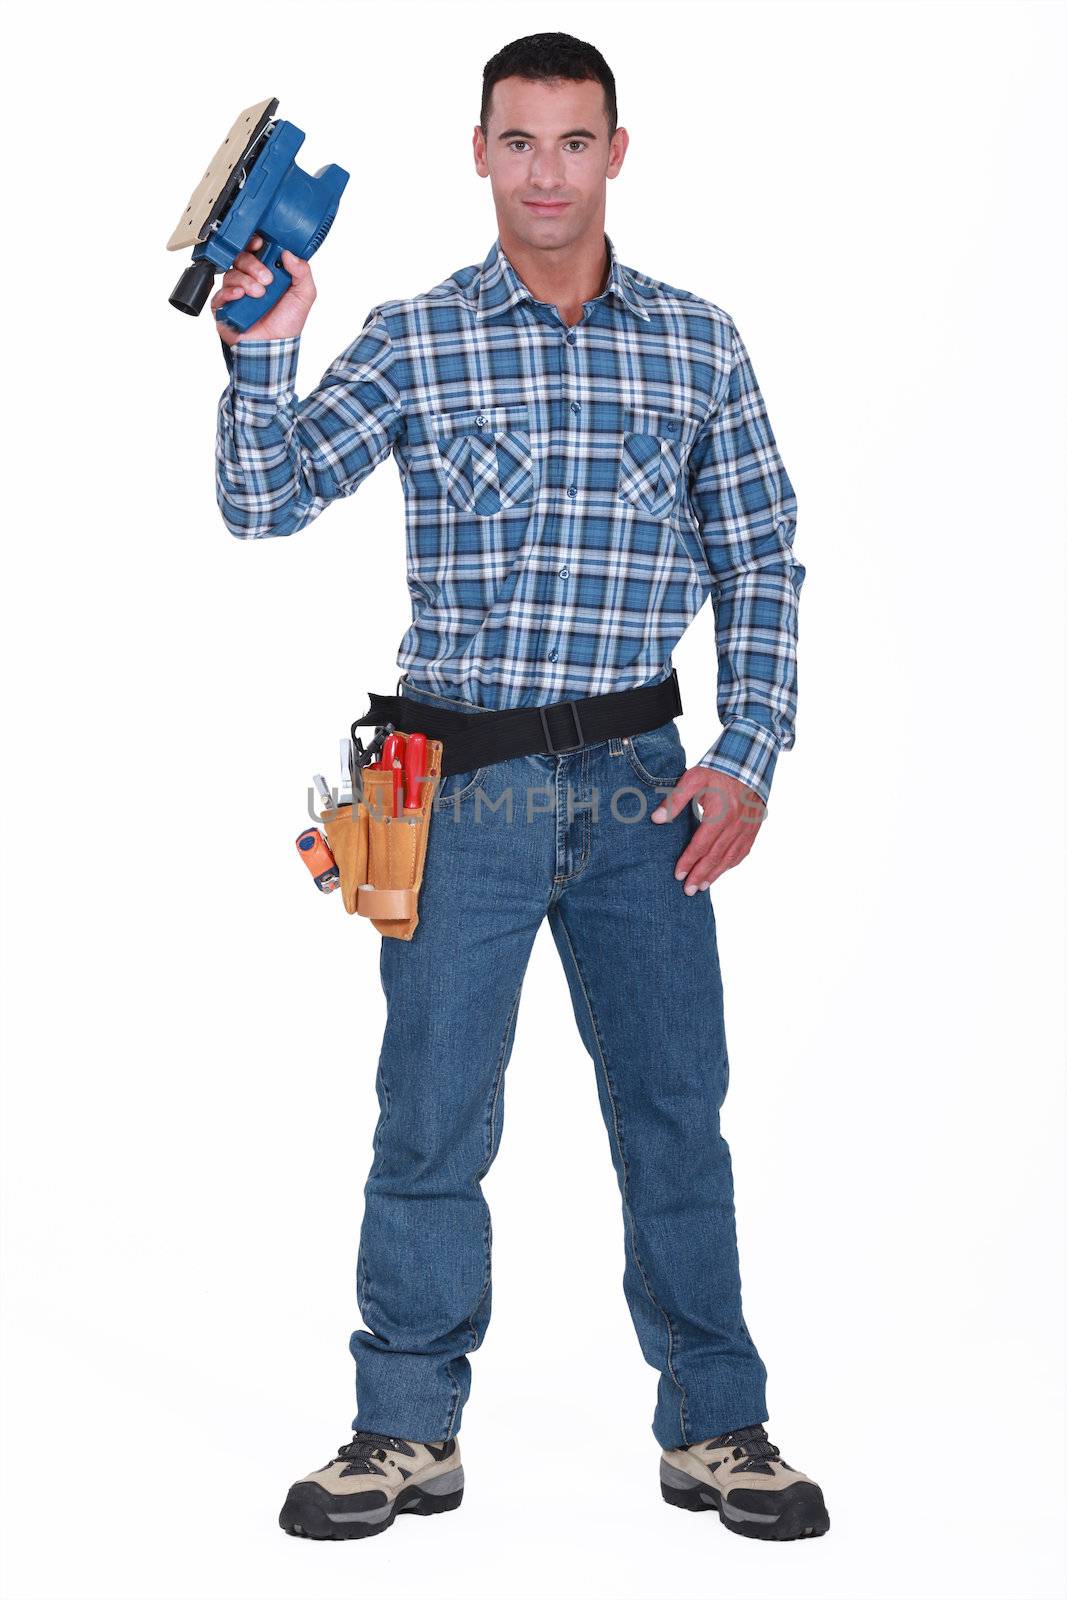 Man with an electric sander by phovoir